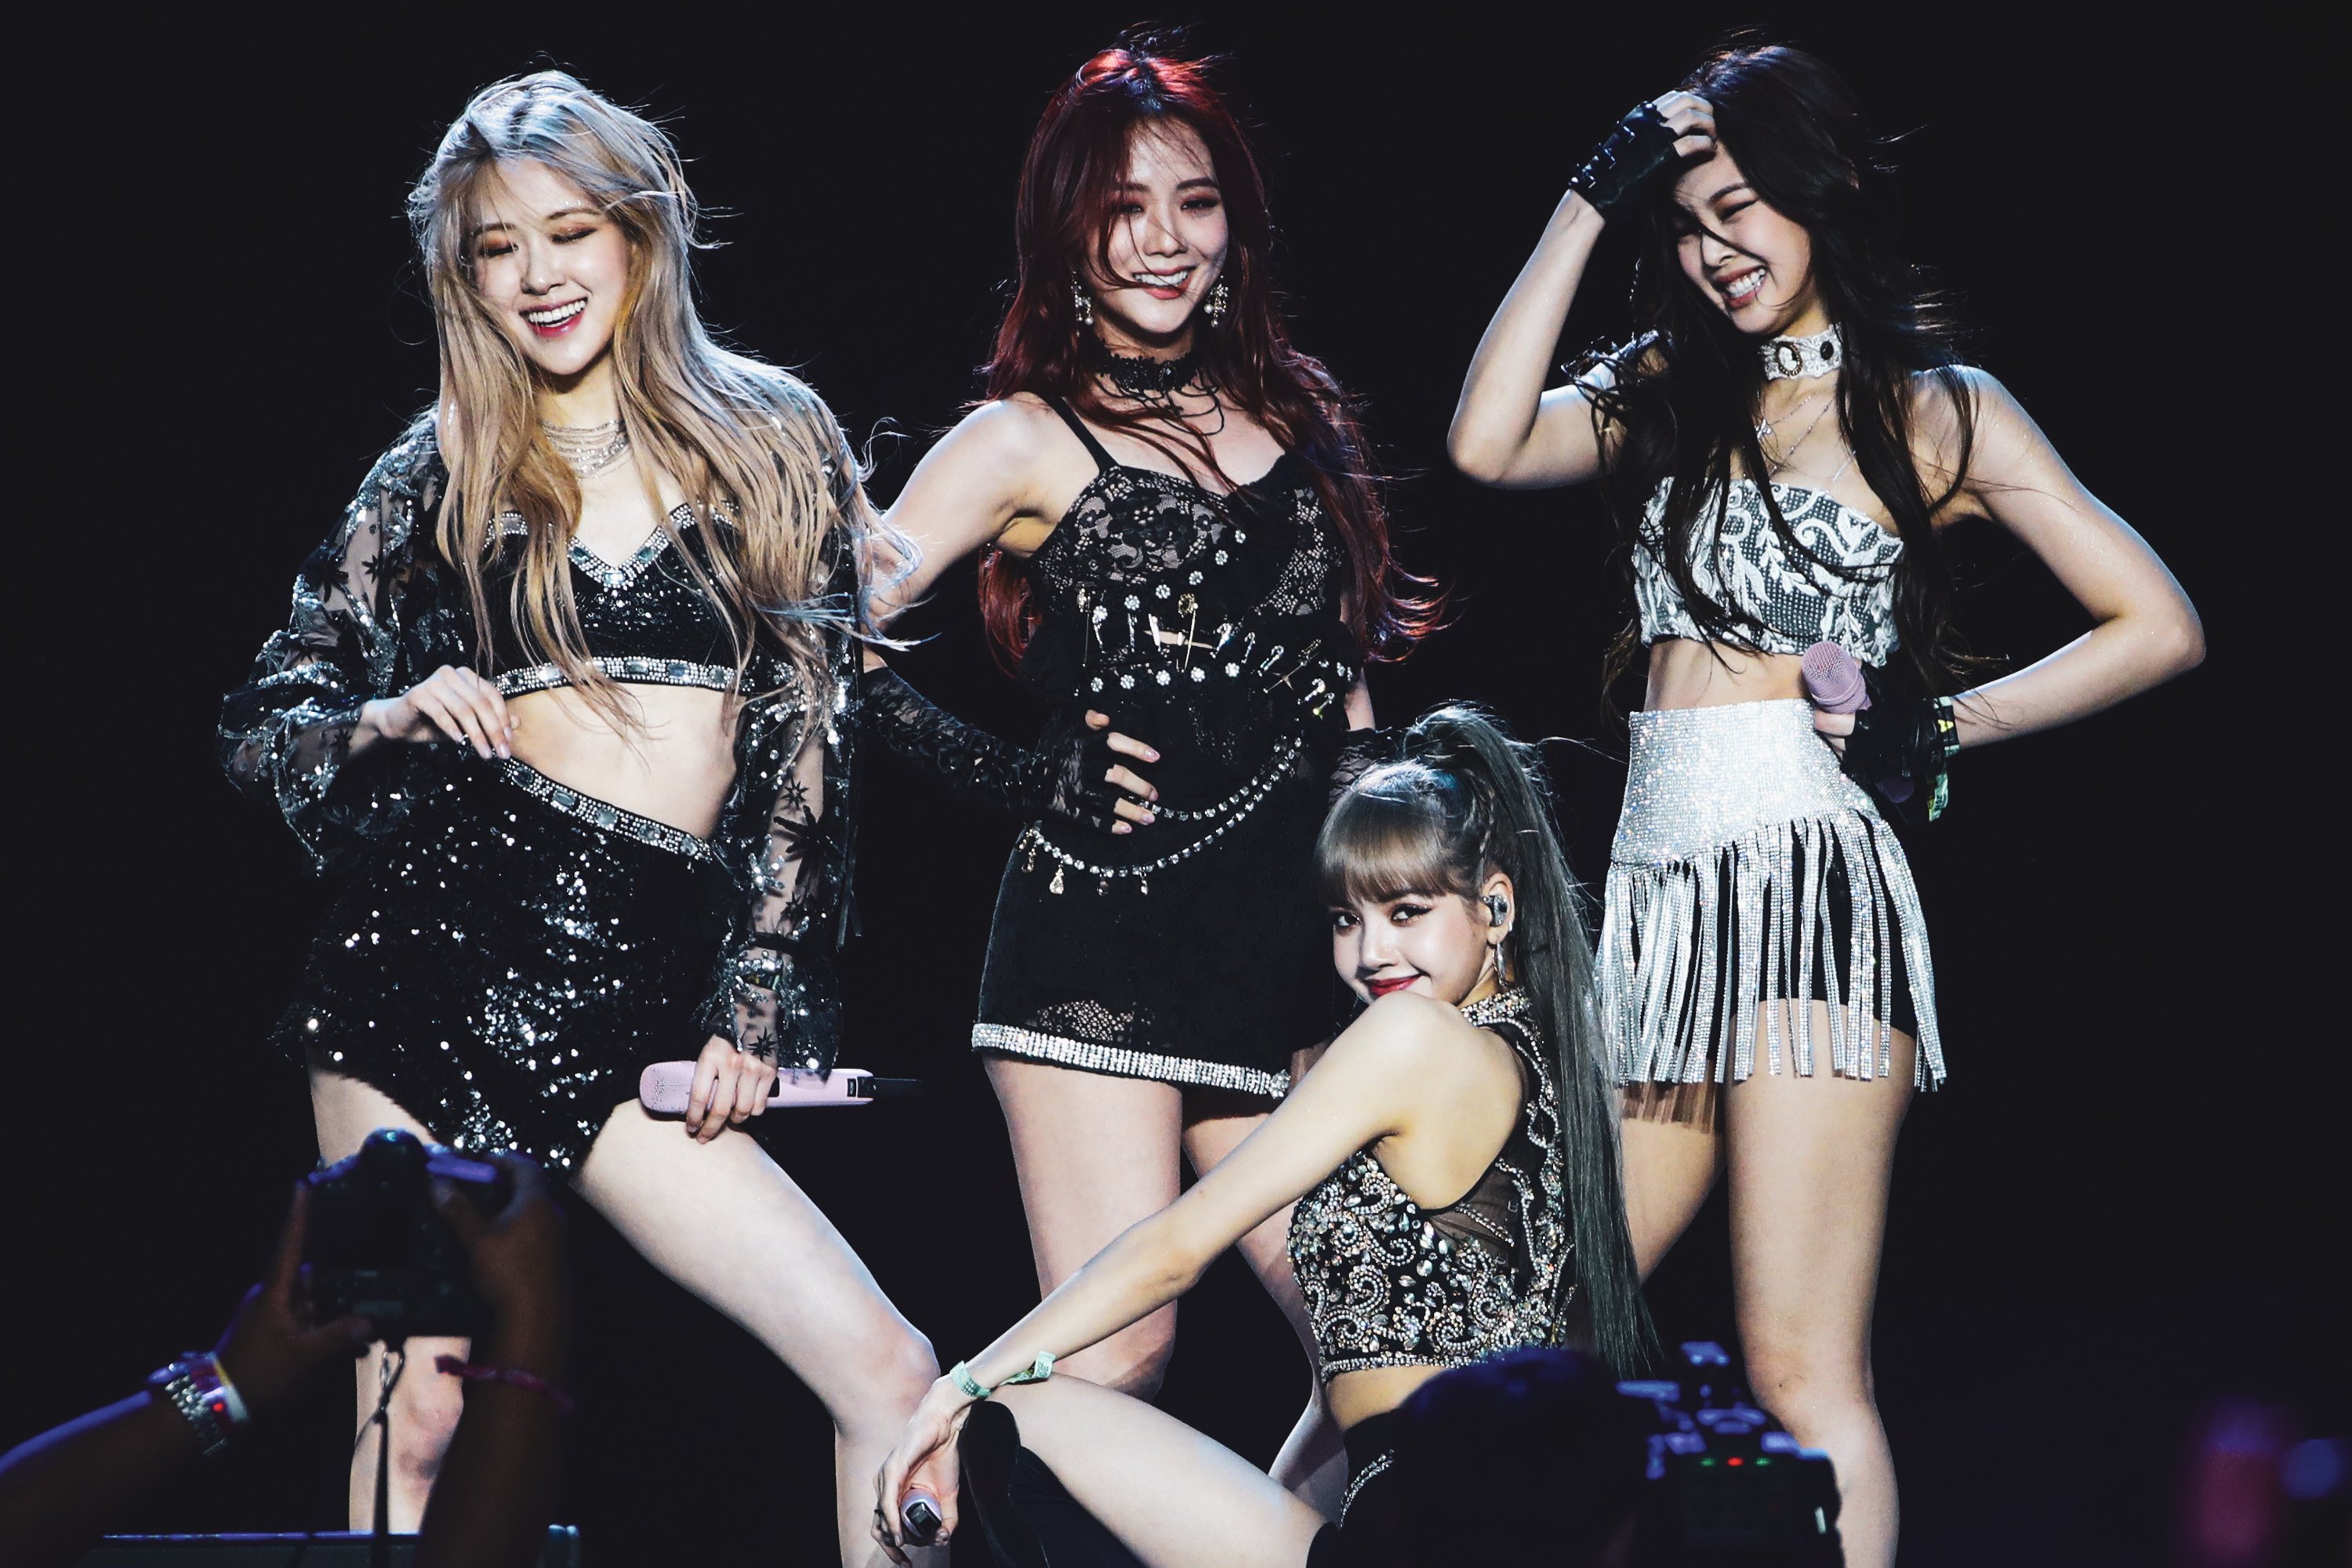 Blackpink Gears Up for August Comeback New Music & World Tour, Says YG